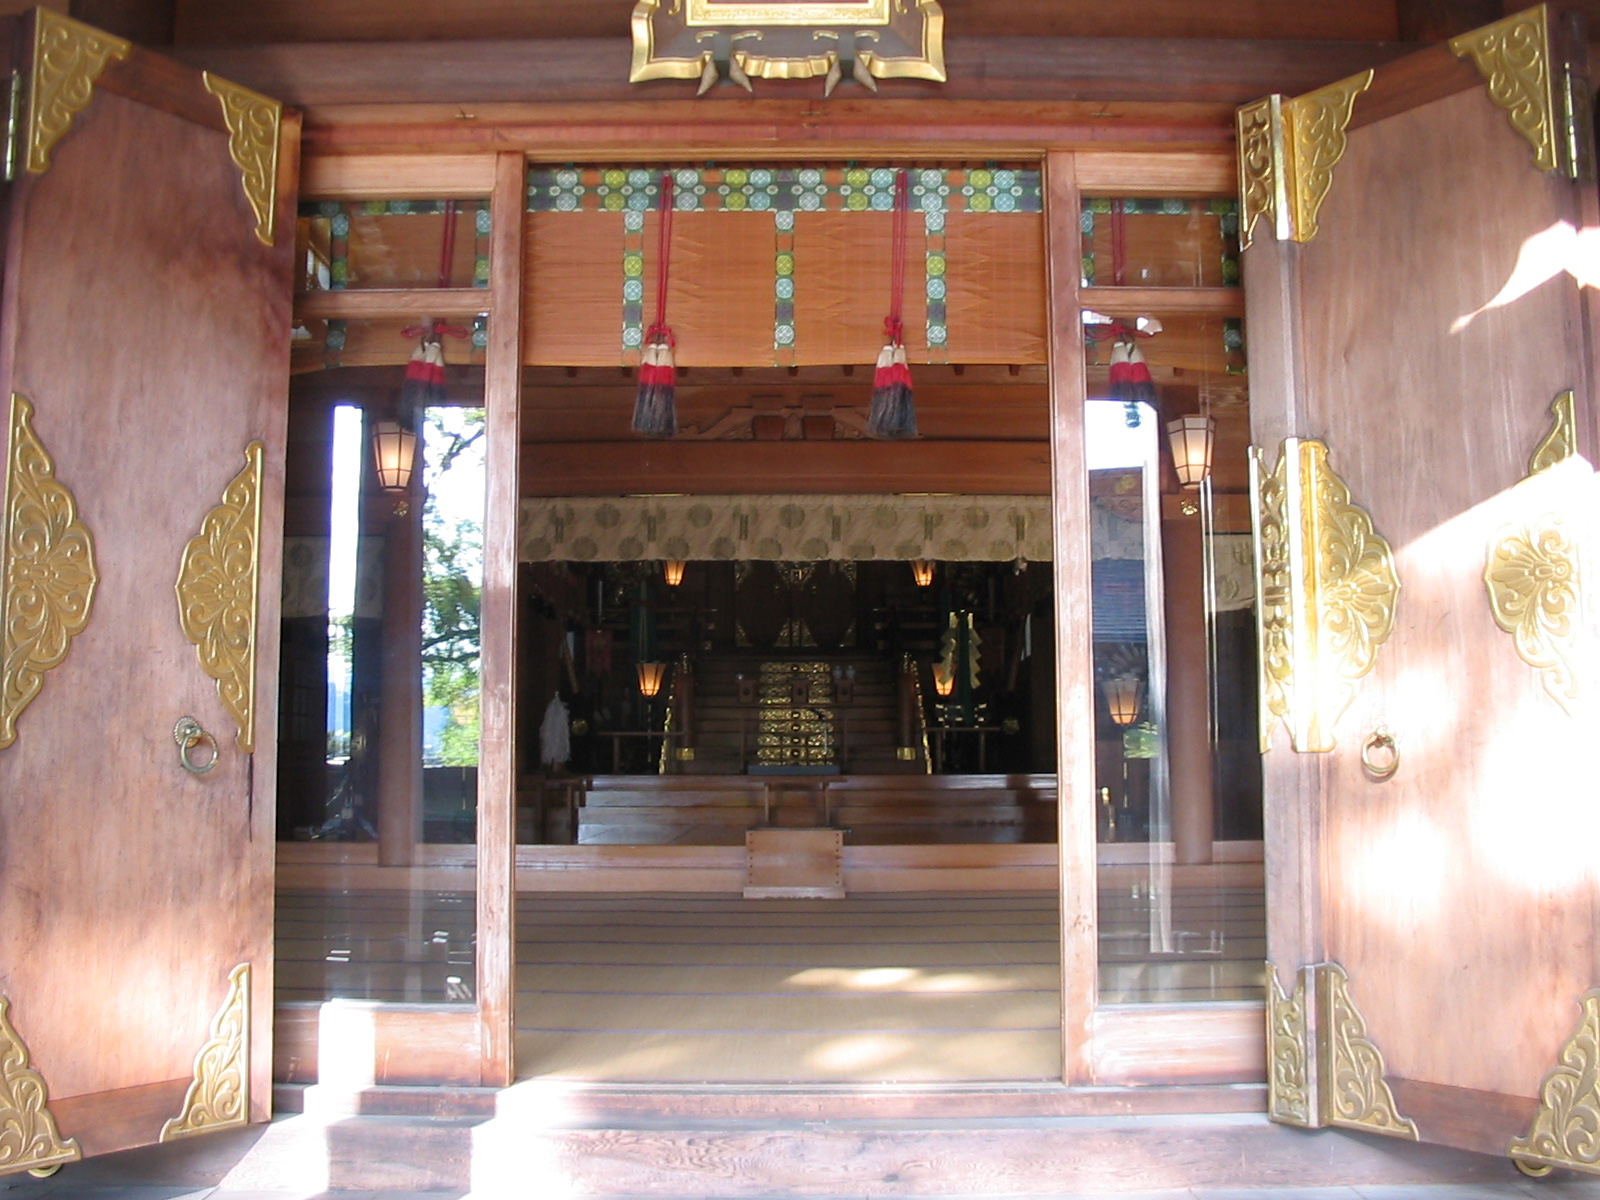 entrace to the shrine's main building